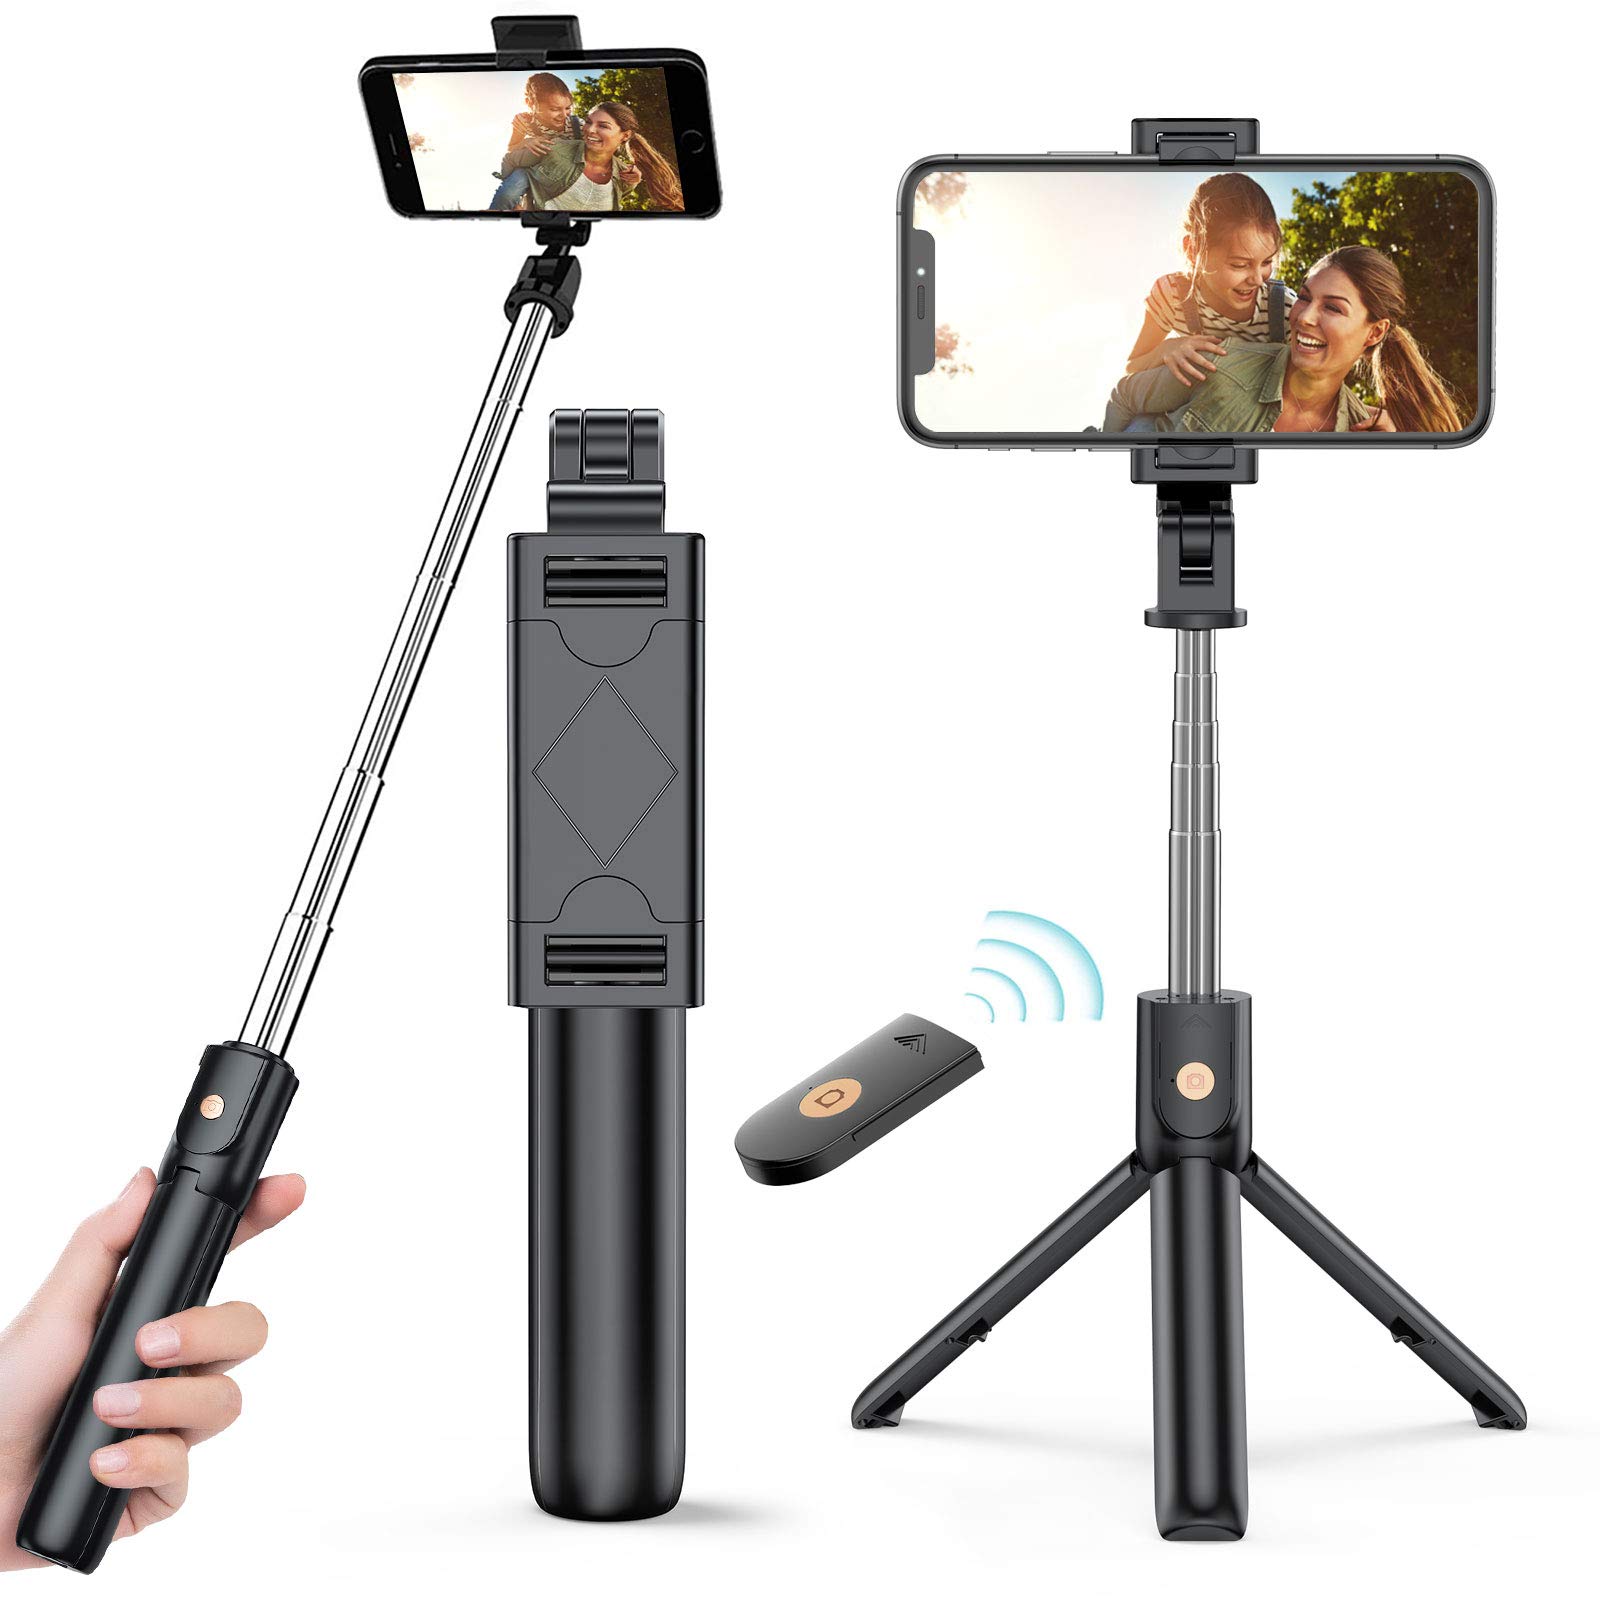 Patasen 3 in 1 Folding Bluetooth Selfie Stick with Detachable Wireless Remote Control Shutter Extendable Tripod Stand 360 Degree Rotation Phone Holder Works with iPhone X 8/8Plus Most Smartphone